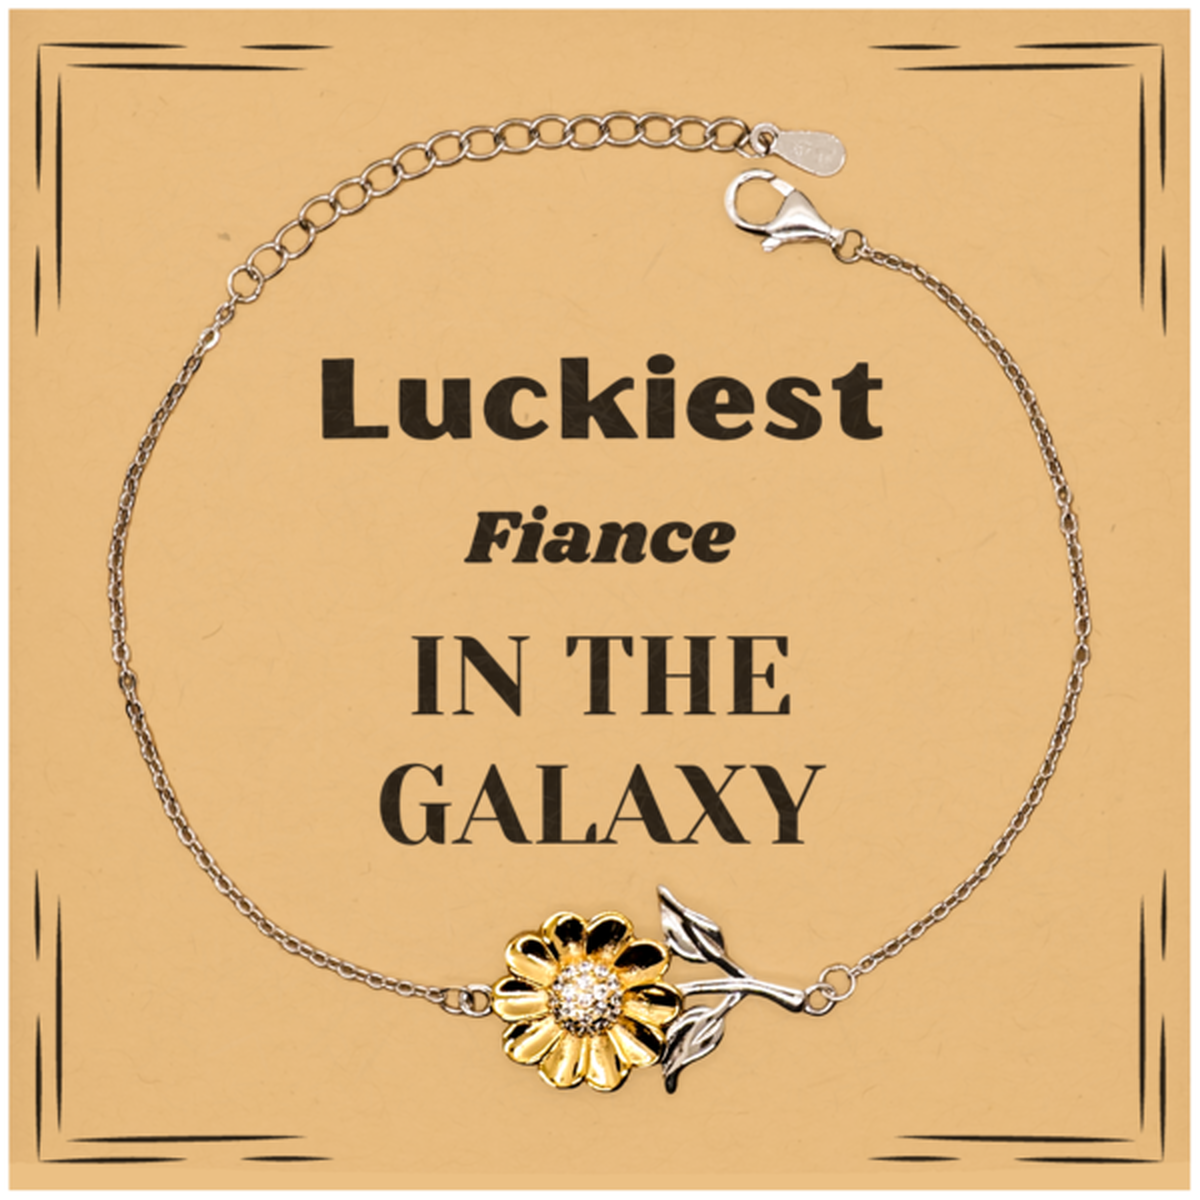 Luckiest Fiance in the Galaxy, To My Fiance Message Card Gifts, Christmas Fiance Sunflower Bracelet Gifts, X-mas Birthday Unique Gifts For Fiance Men Women